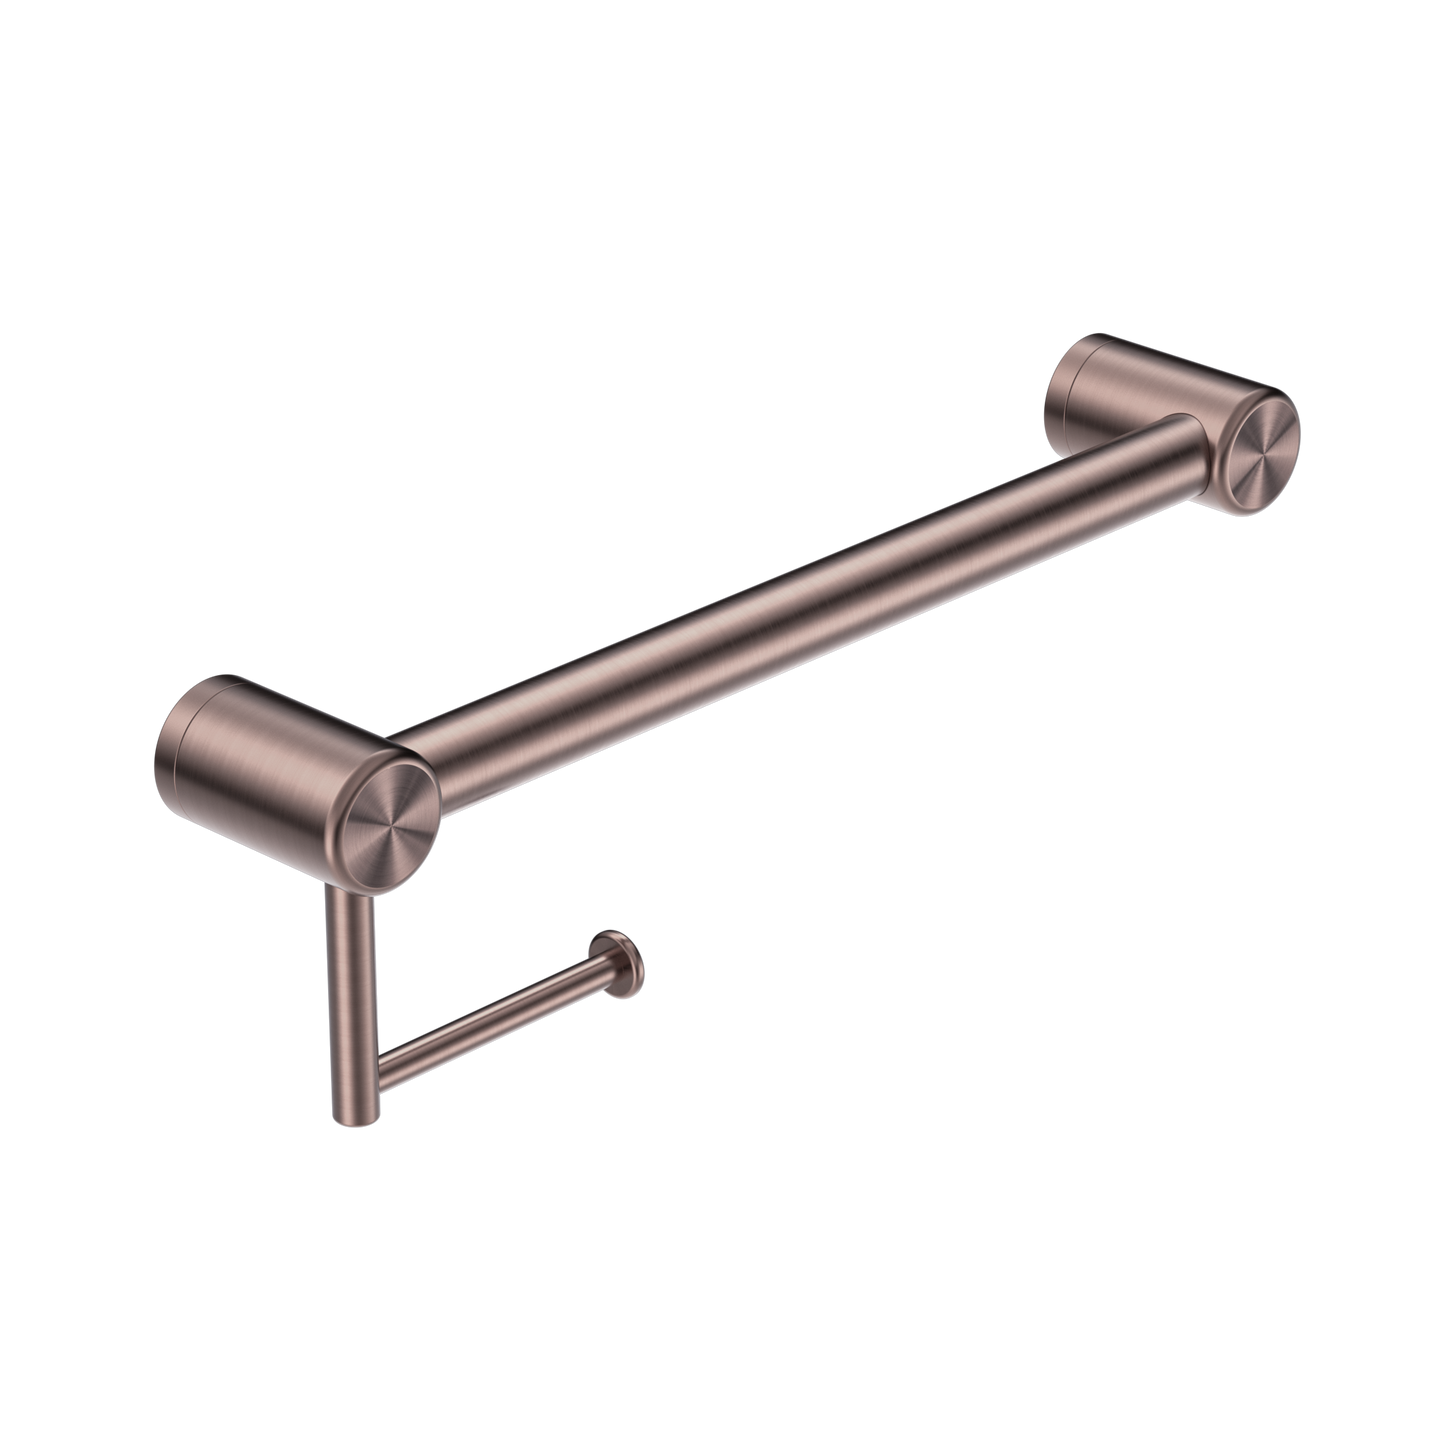 CALIBRE MECCA 32MM GRAB RAIL WITH TOILET ROLL HOLDER 450MM BRUSHED BRONZE